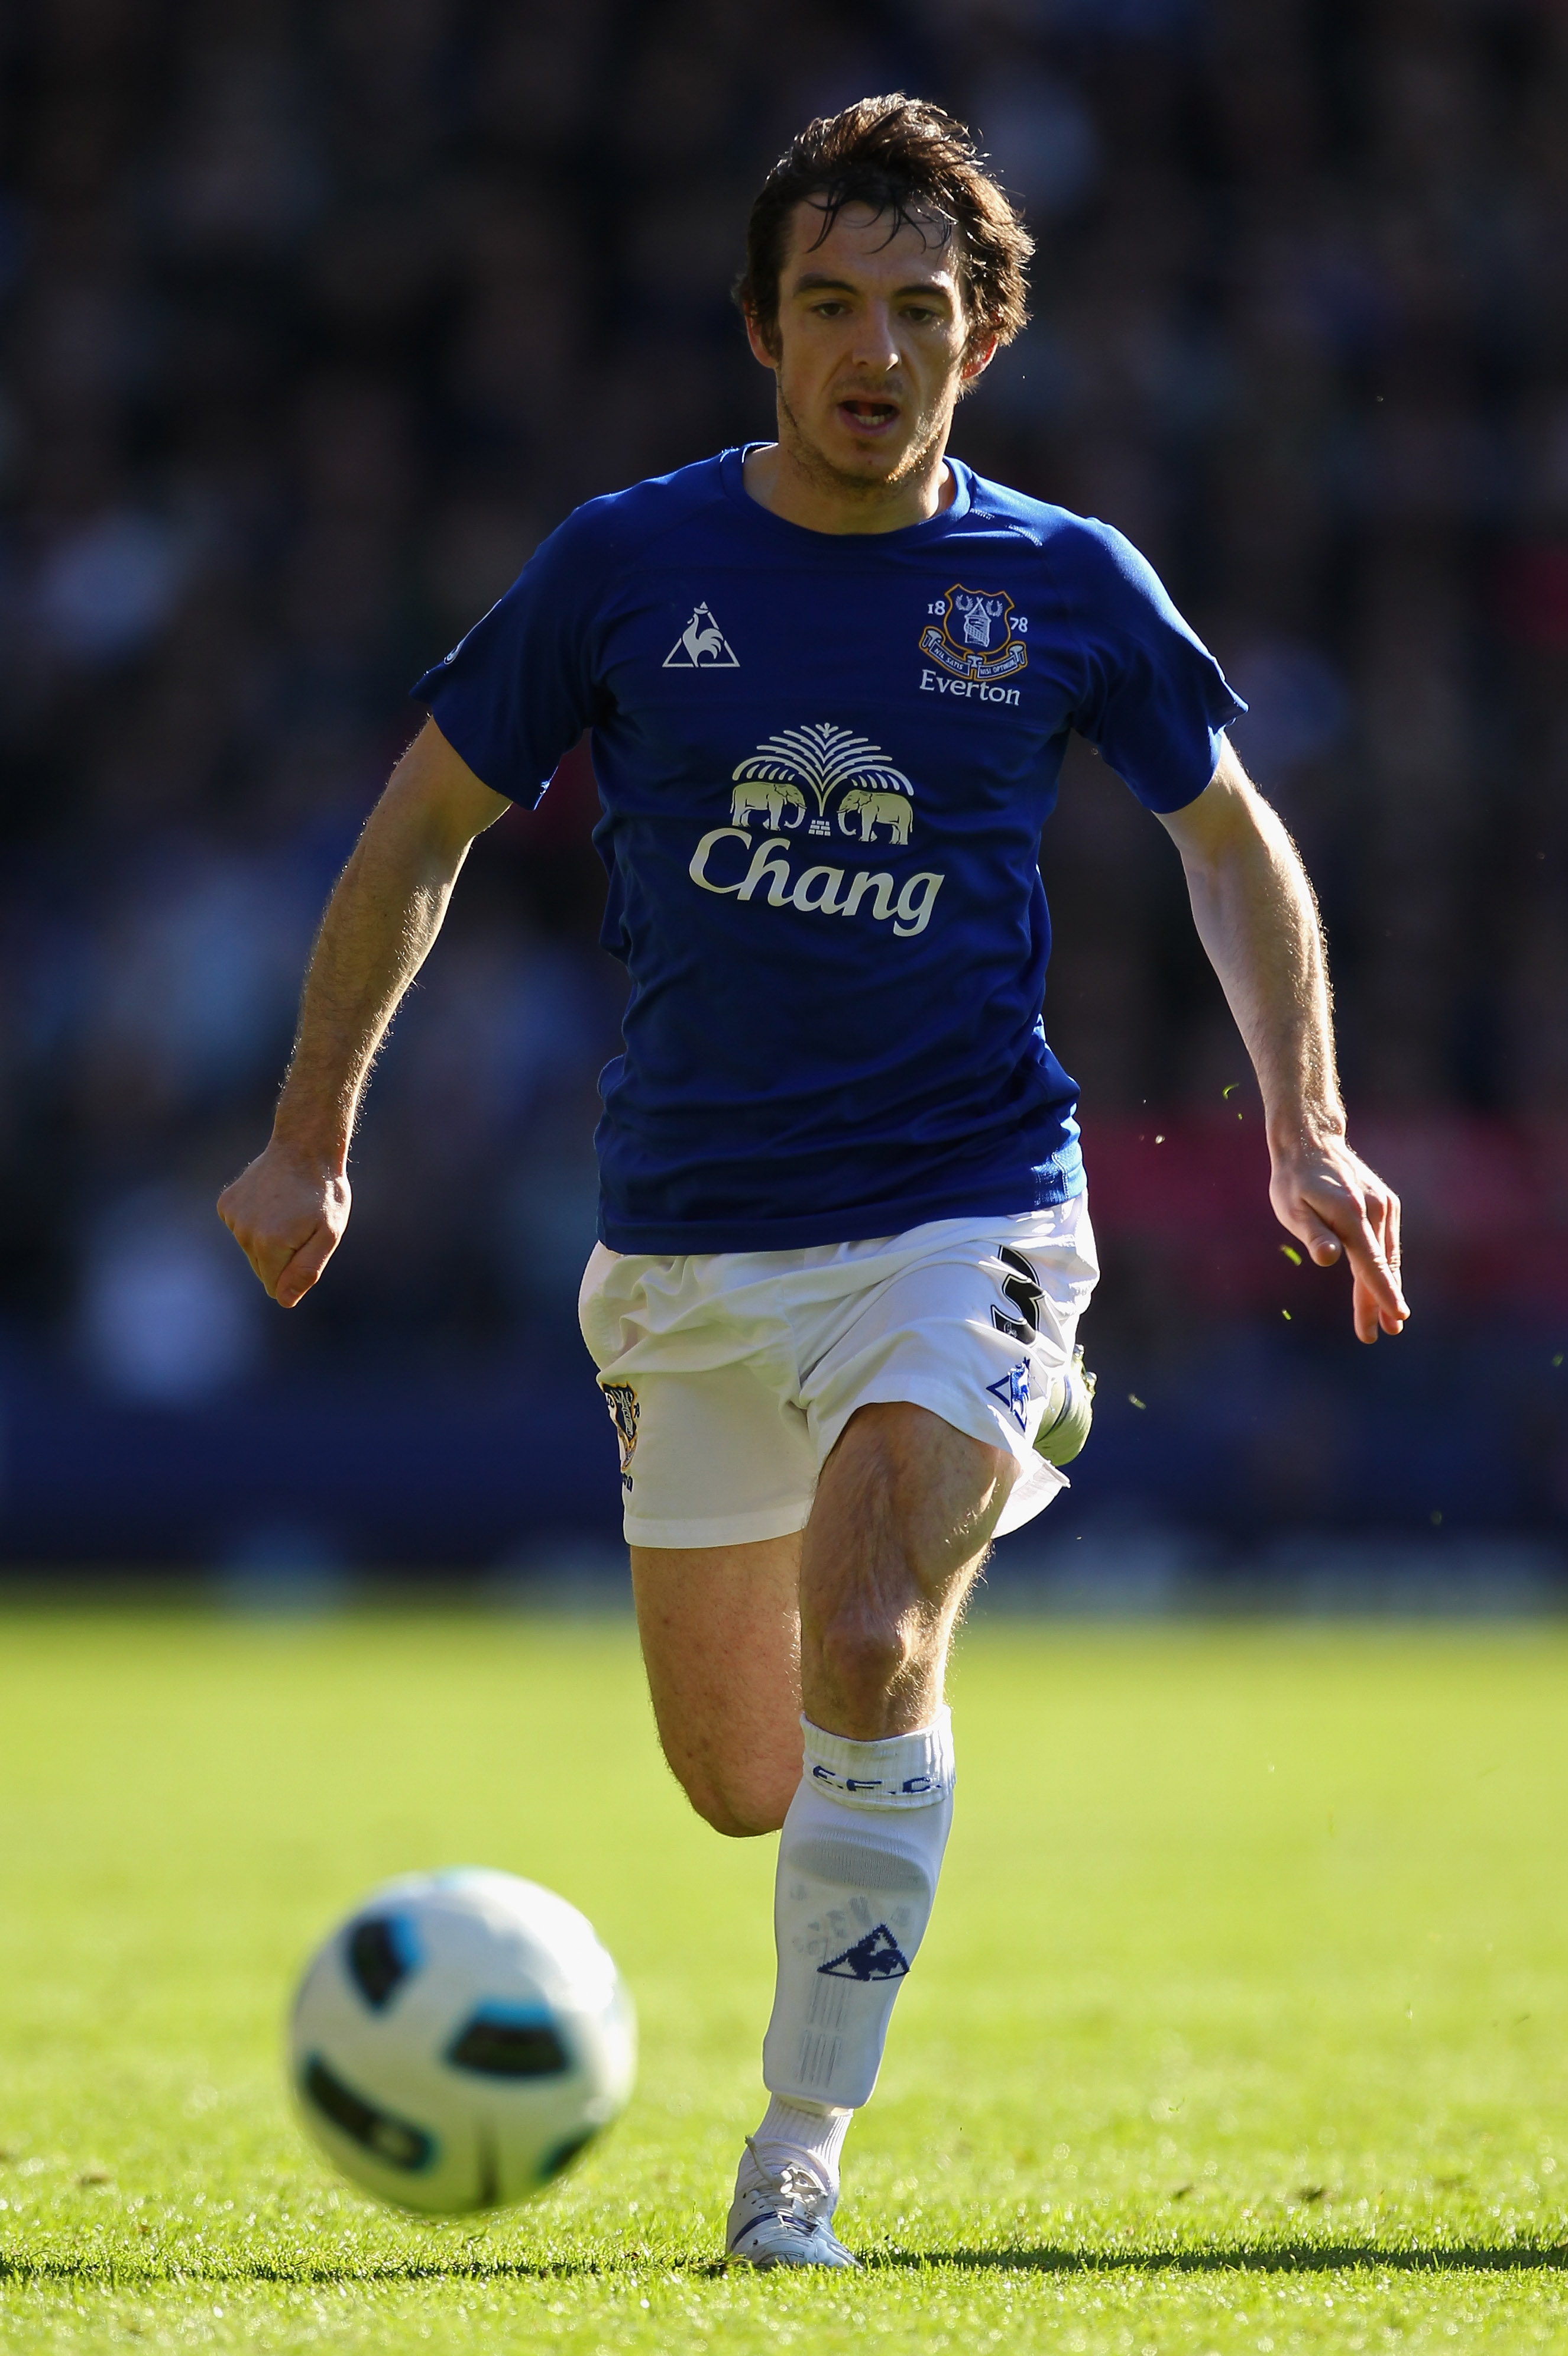 LIVERPOOL, ENGLAND - APRIL 02:  Leighton Baines of Everton chases the ball during the Barclays Premier League match between Everton and Aston Villa at Goodison Park on April 2, 2011 in Liverpool, England.  (Photo by Alex Livesey/Getty Images)